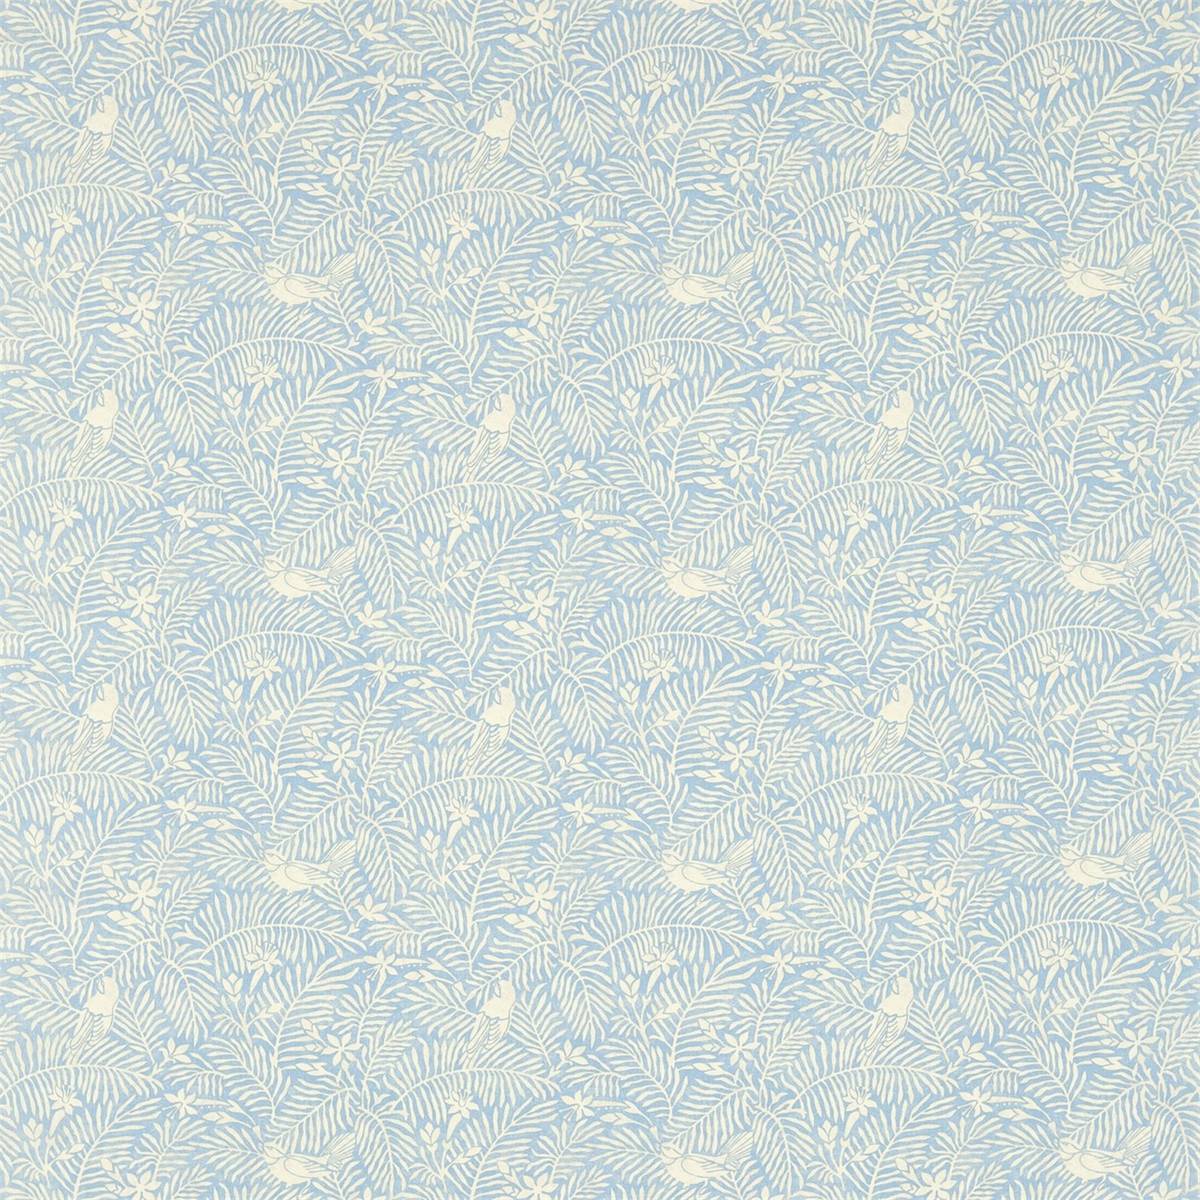 Calico Birds Mineral Blue Fabric by Sanderson